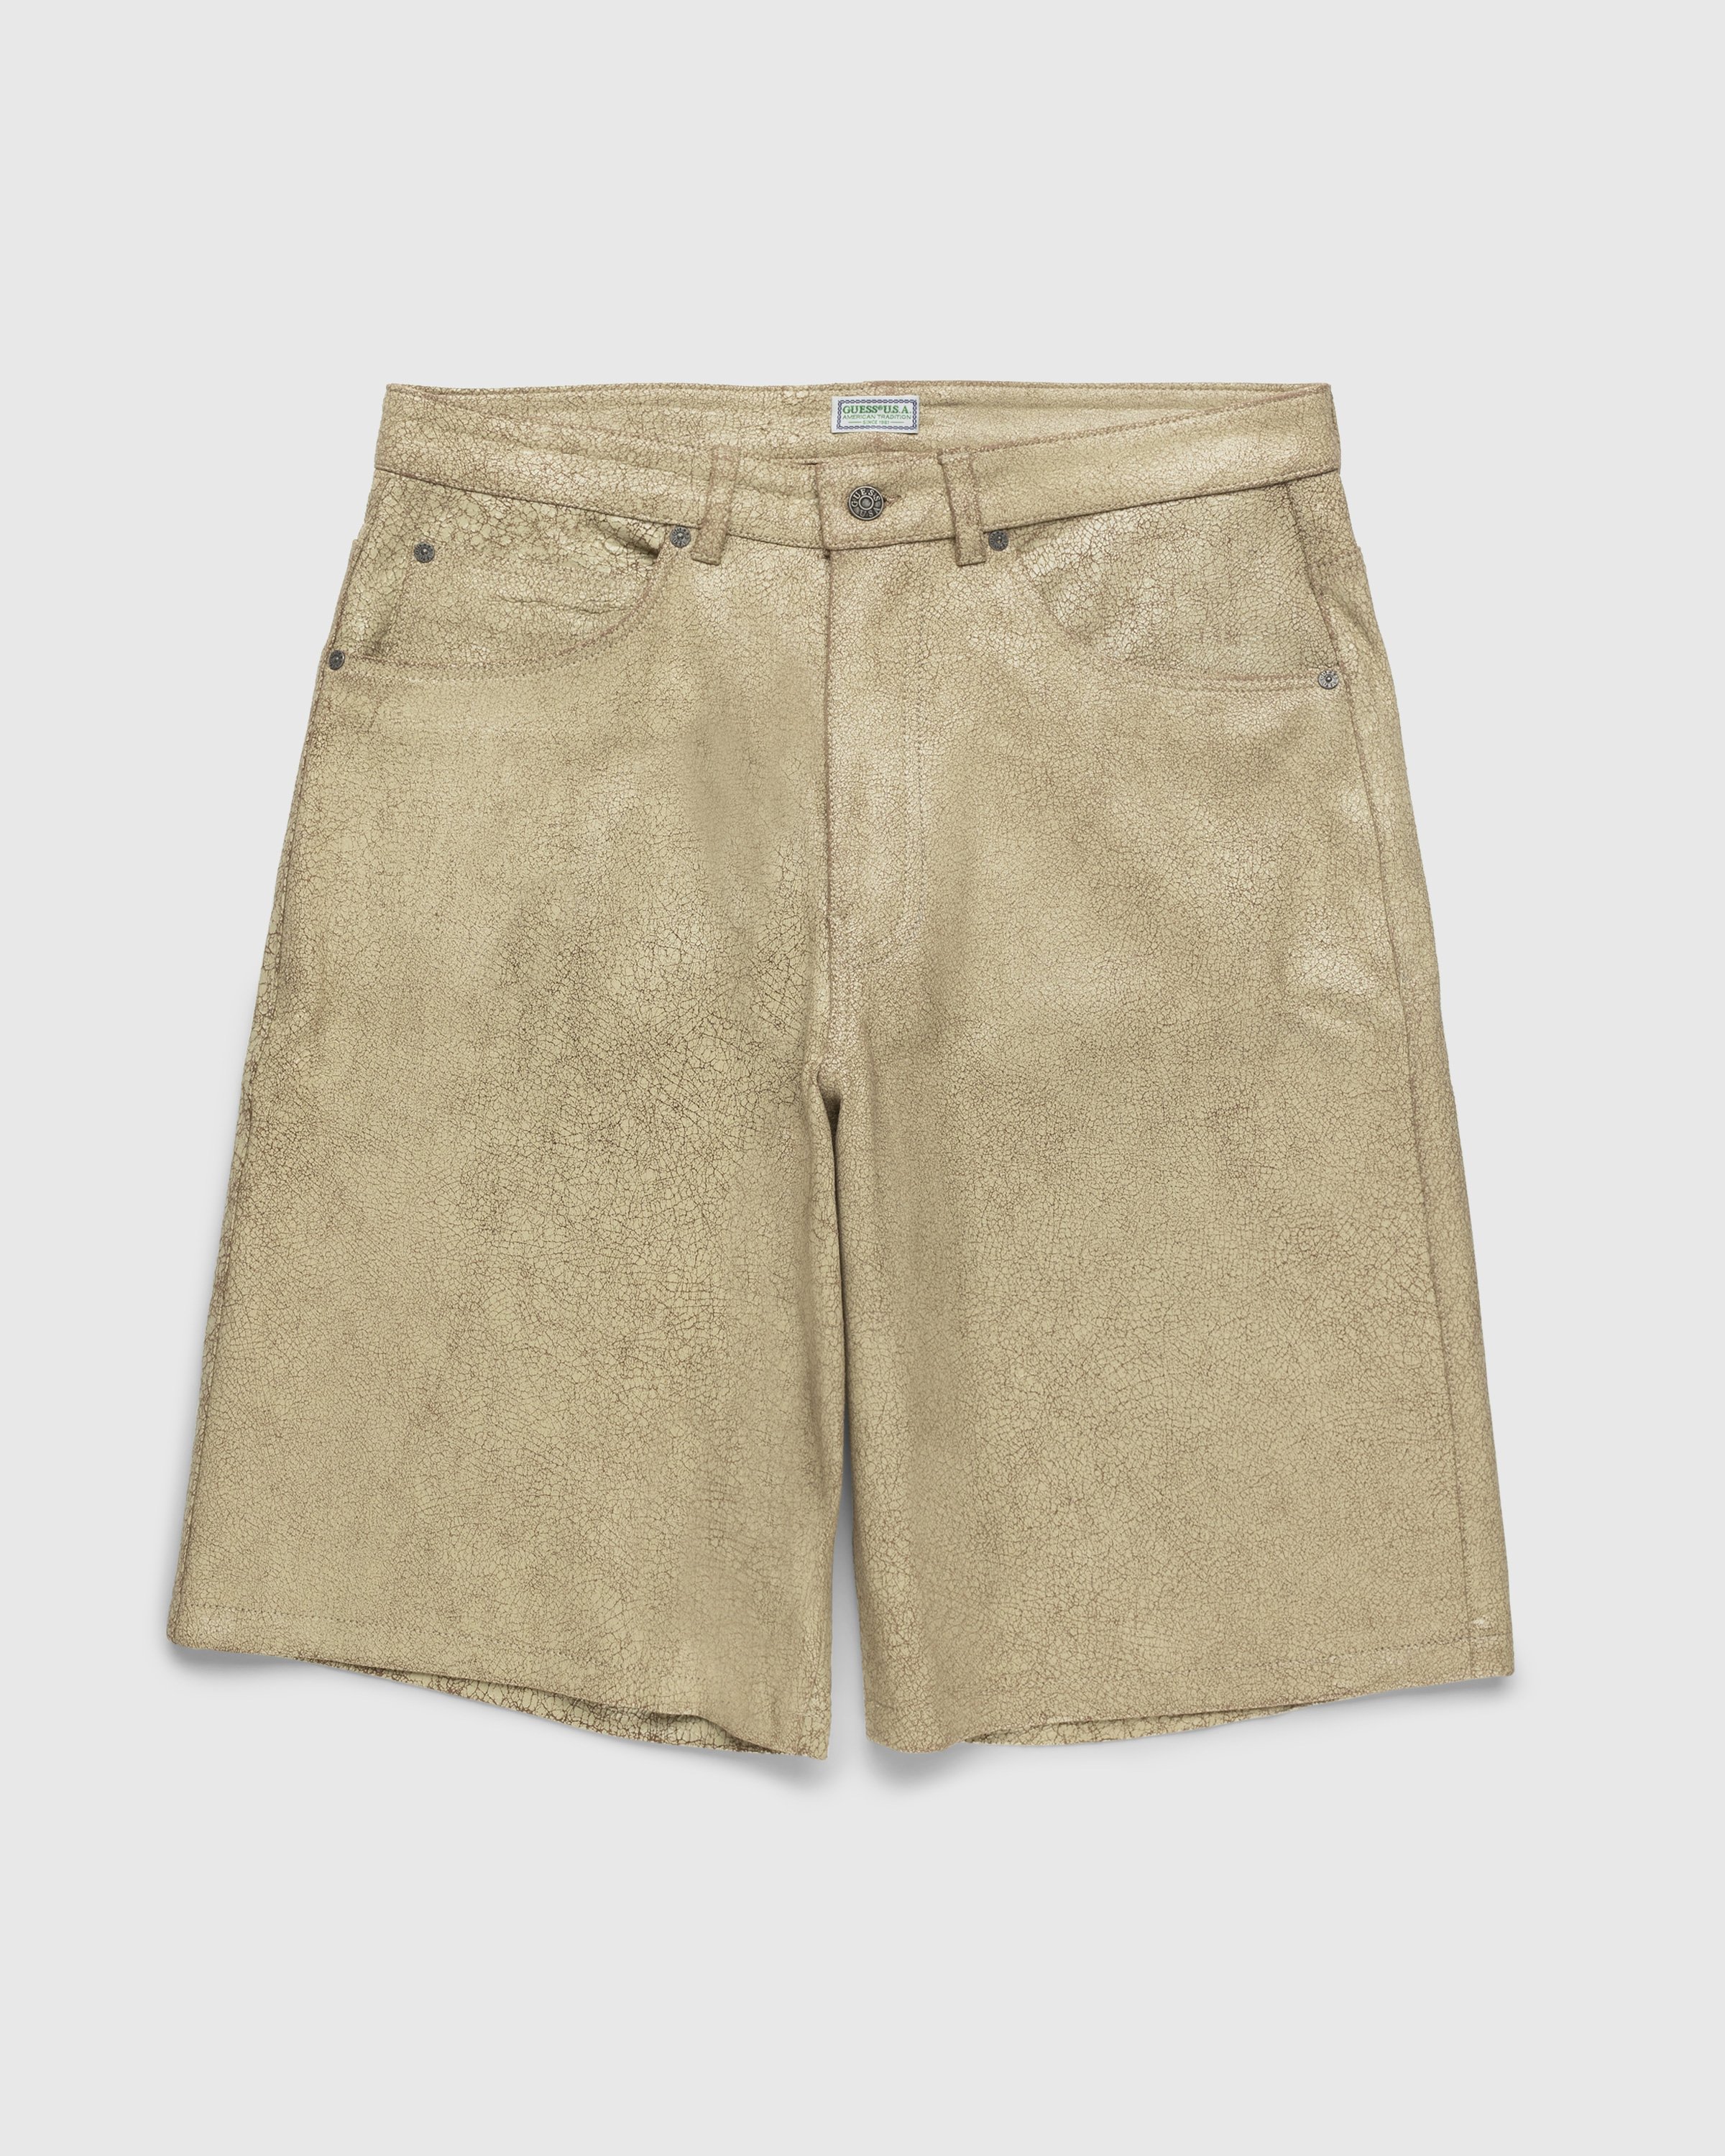 Guess USA - Crackle Leather Short Beige - Clothing - Beige - Image 1